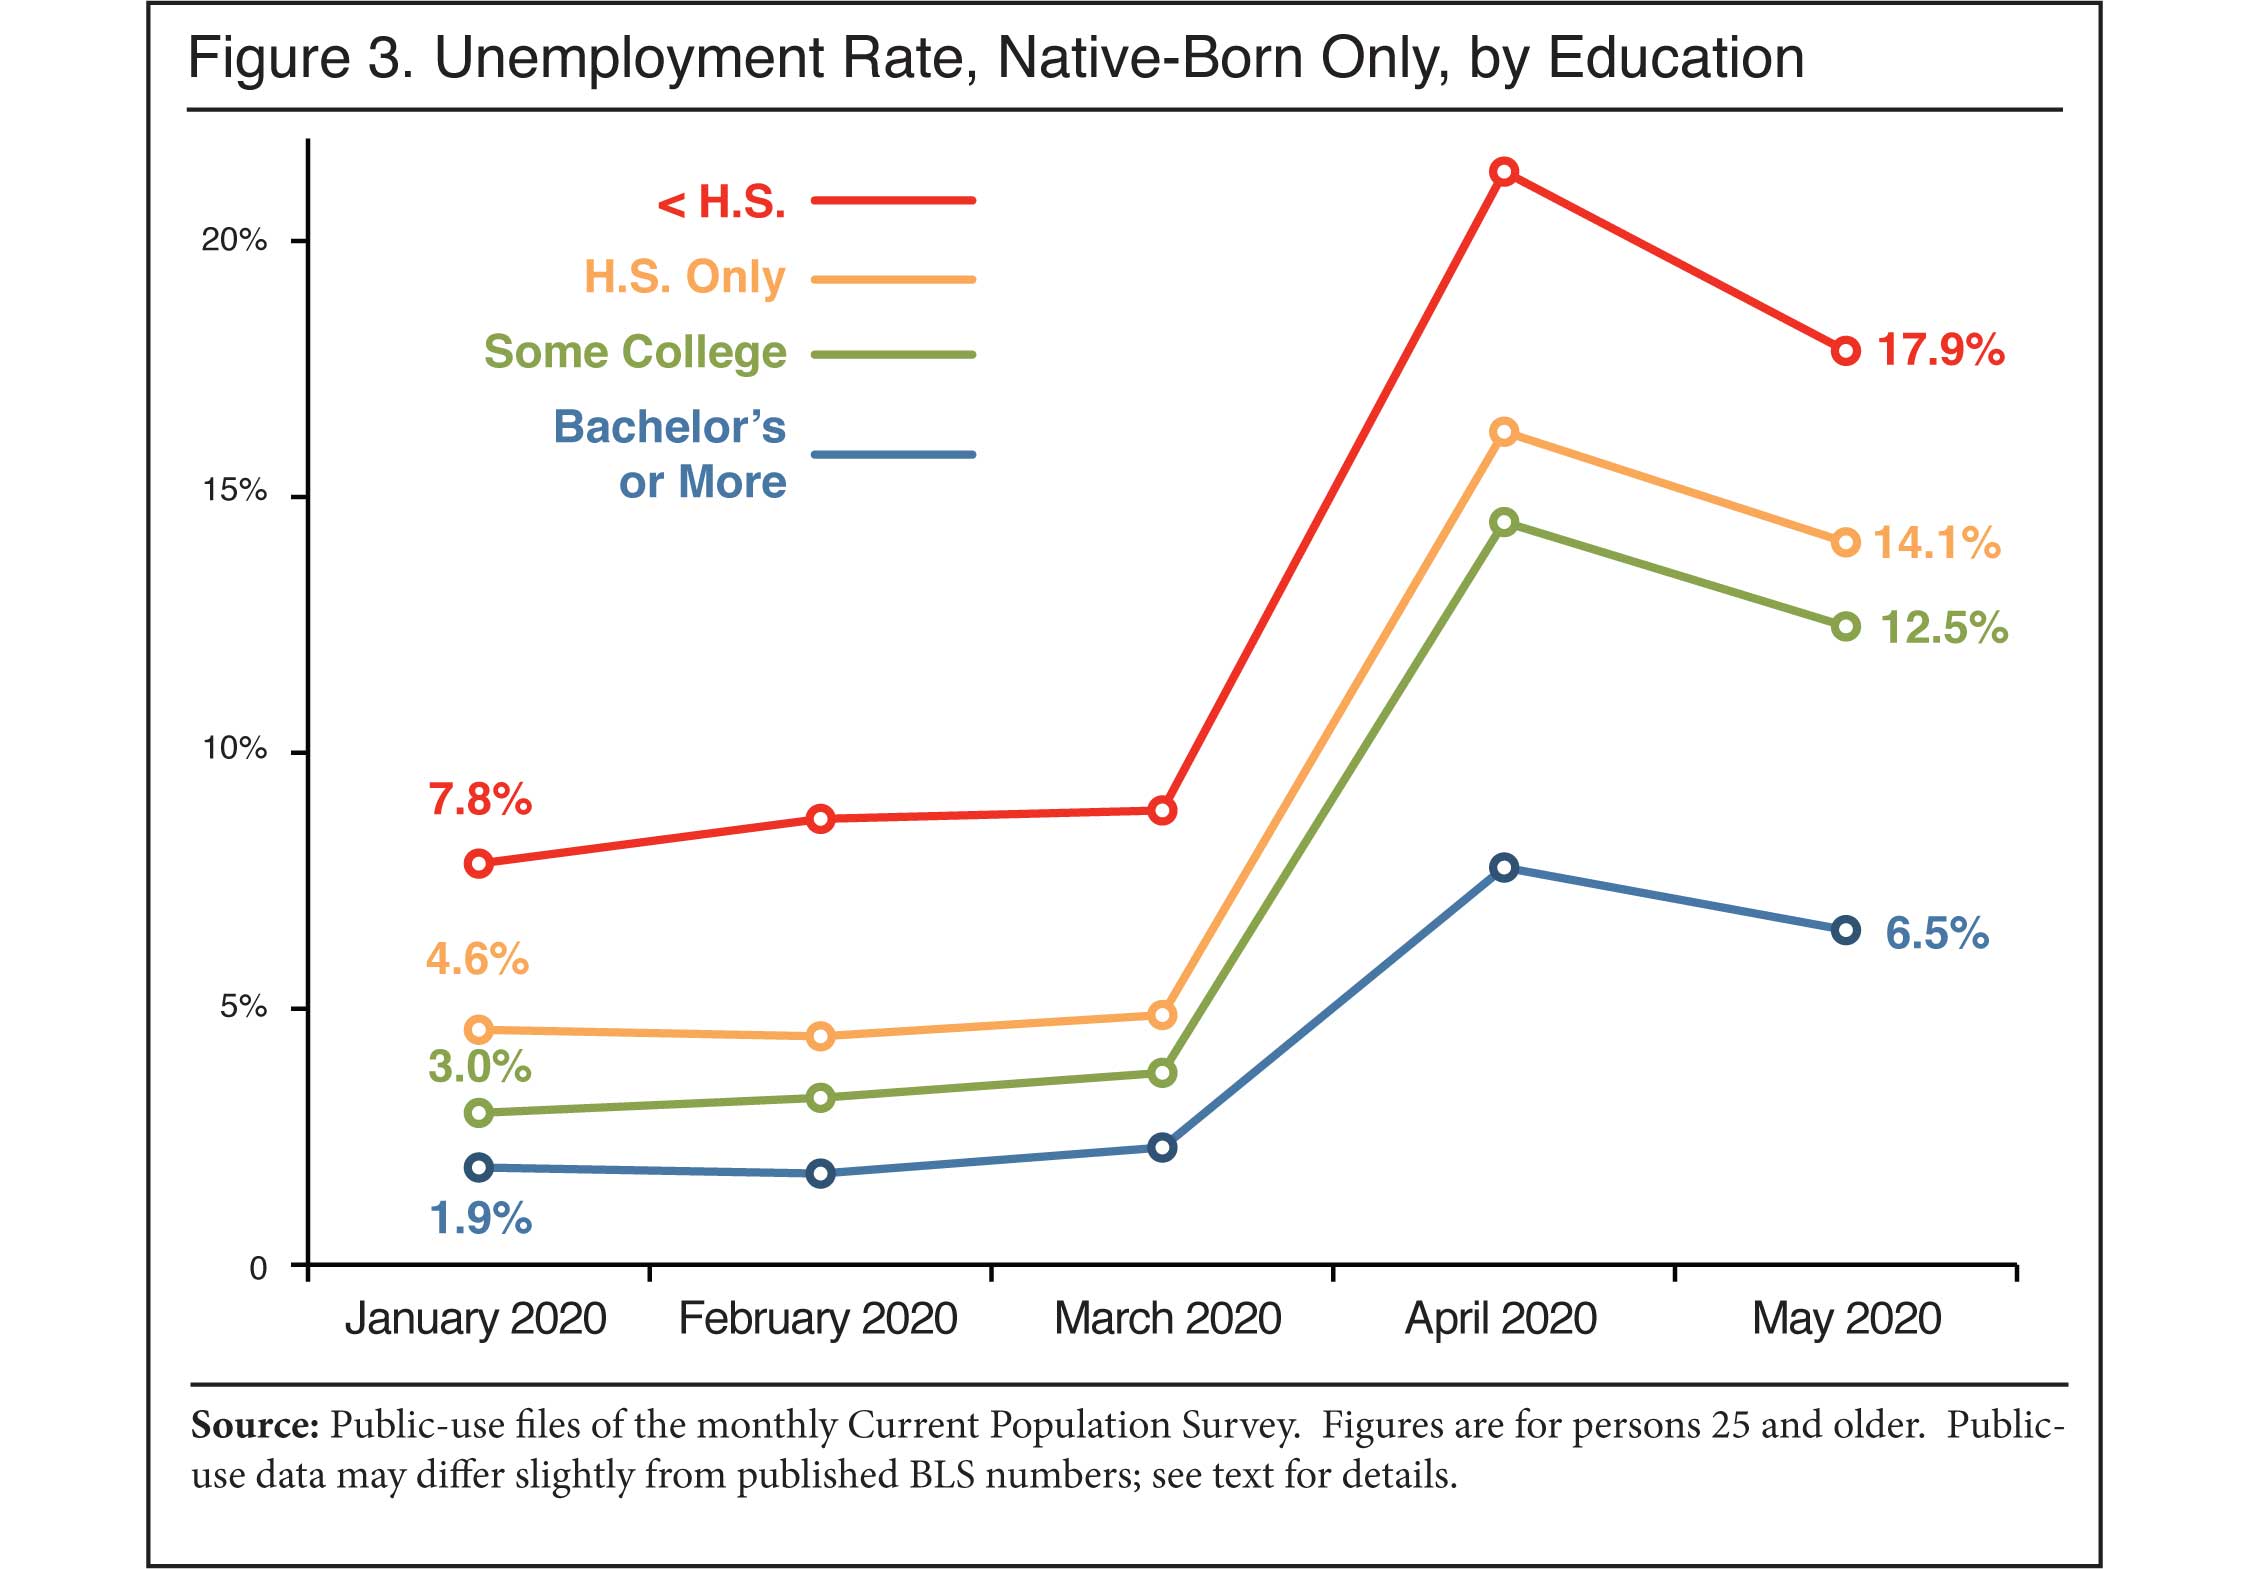 Graph: Unemployment Rate, Native Born Only, by Education